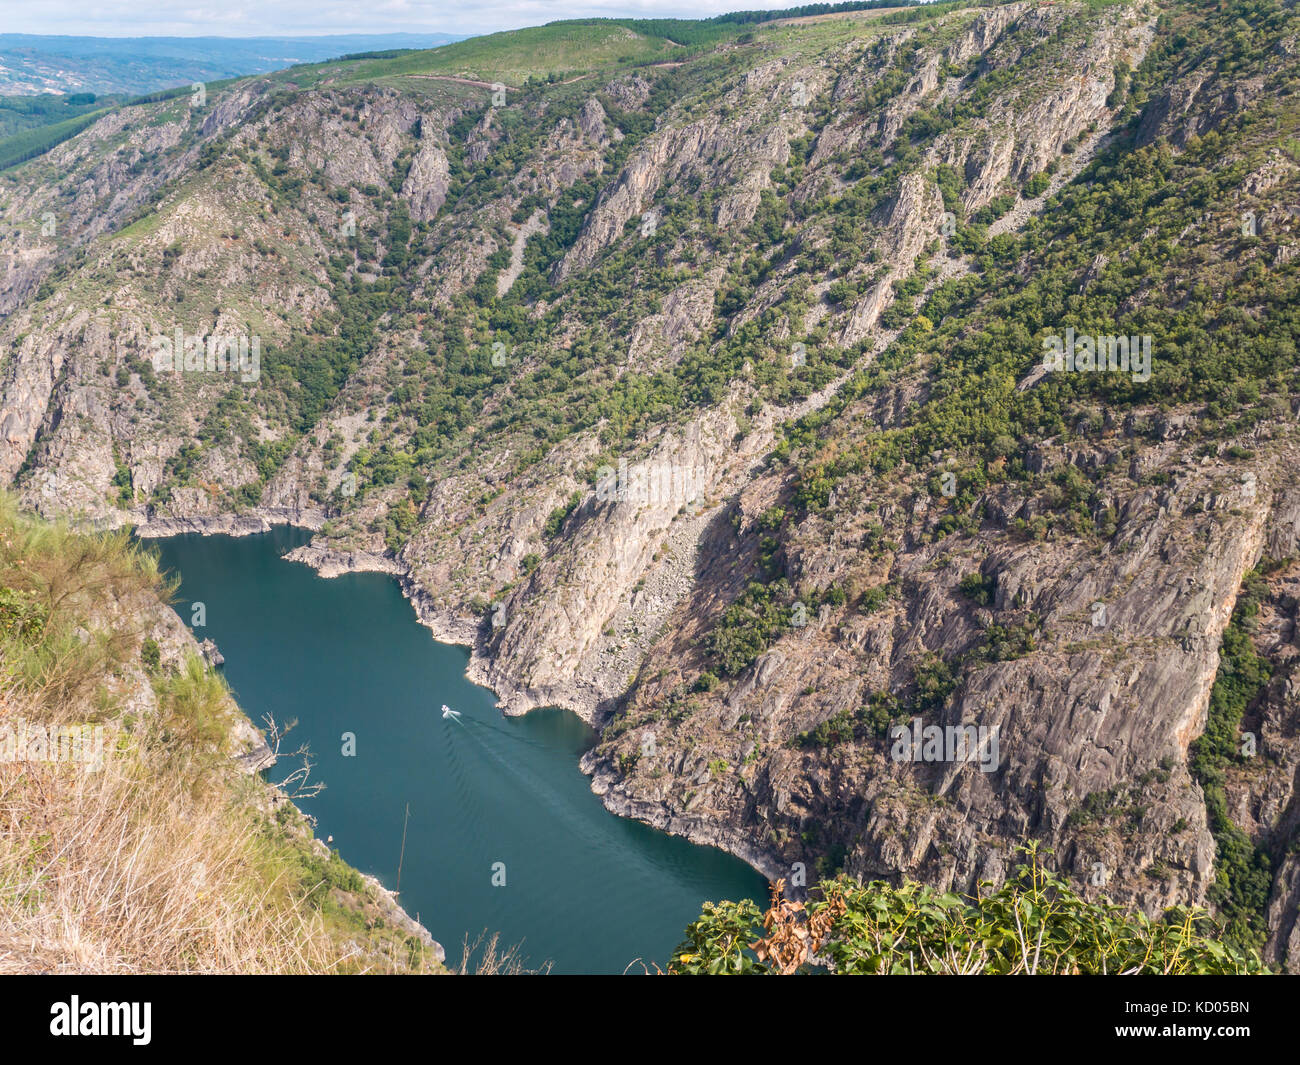 Catamaran in the canyon of Sil river in the province of Ourense, Galicia, Spain. Ribeira Sacra deep canyon landscape view from Vilouxe viewpoint. Stock Photo